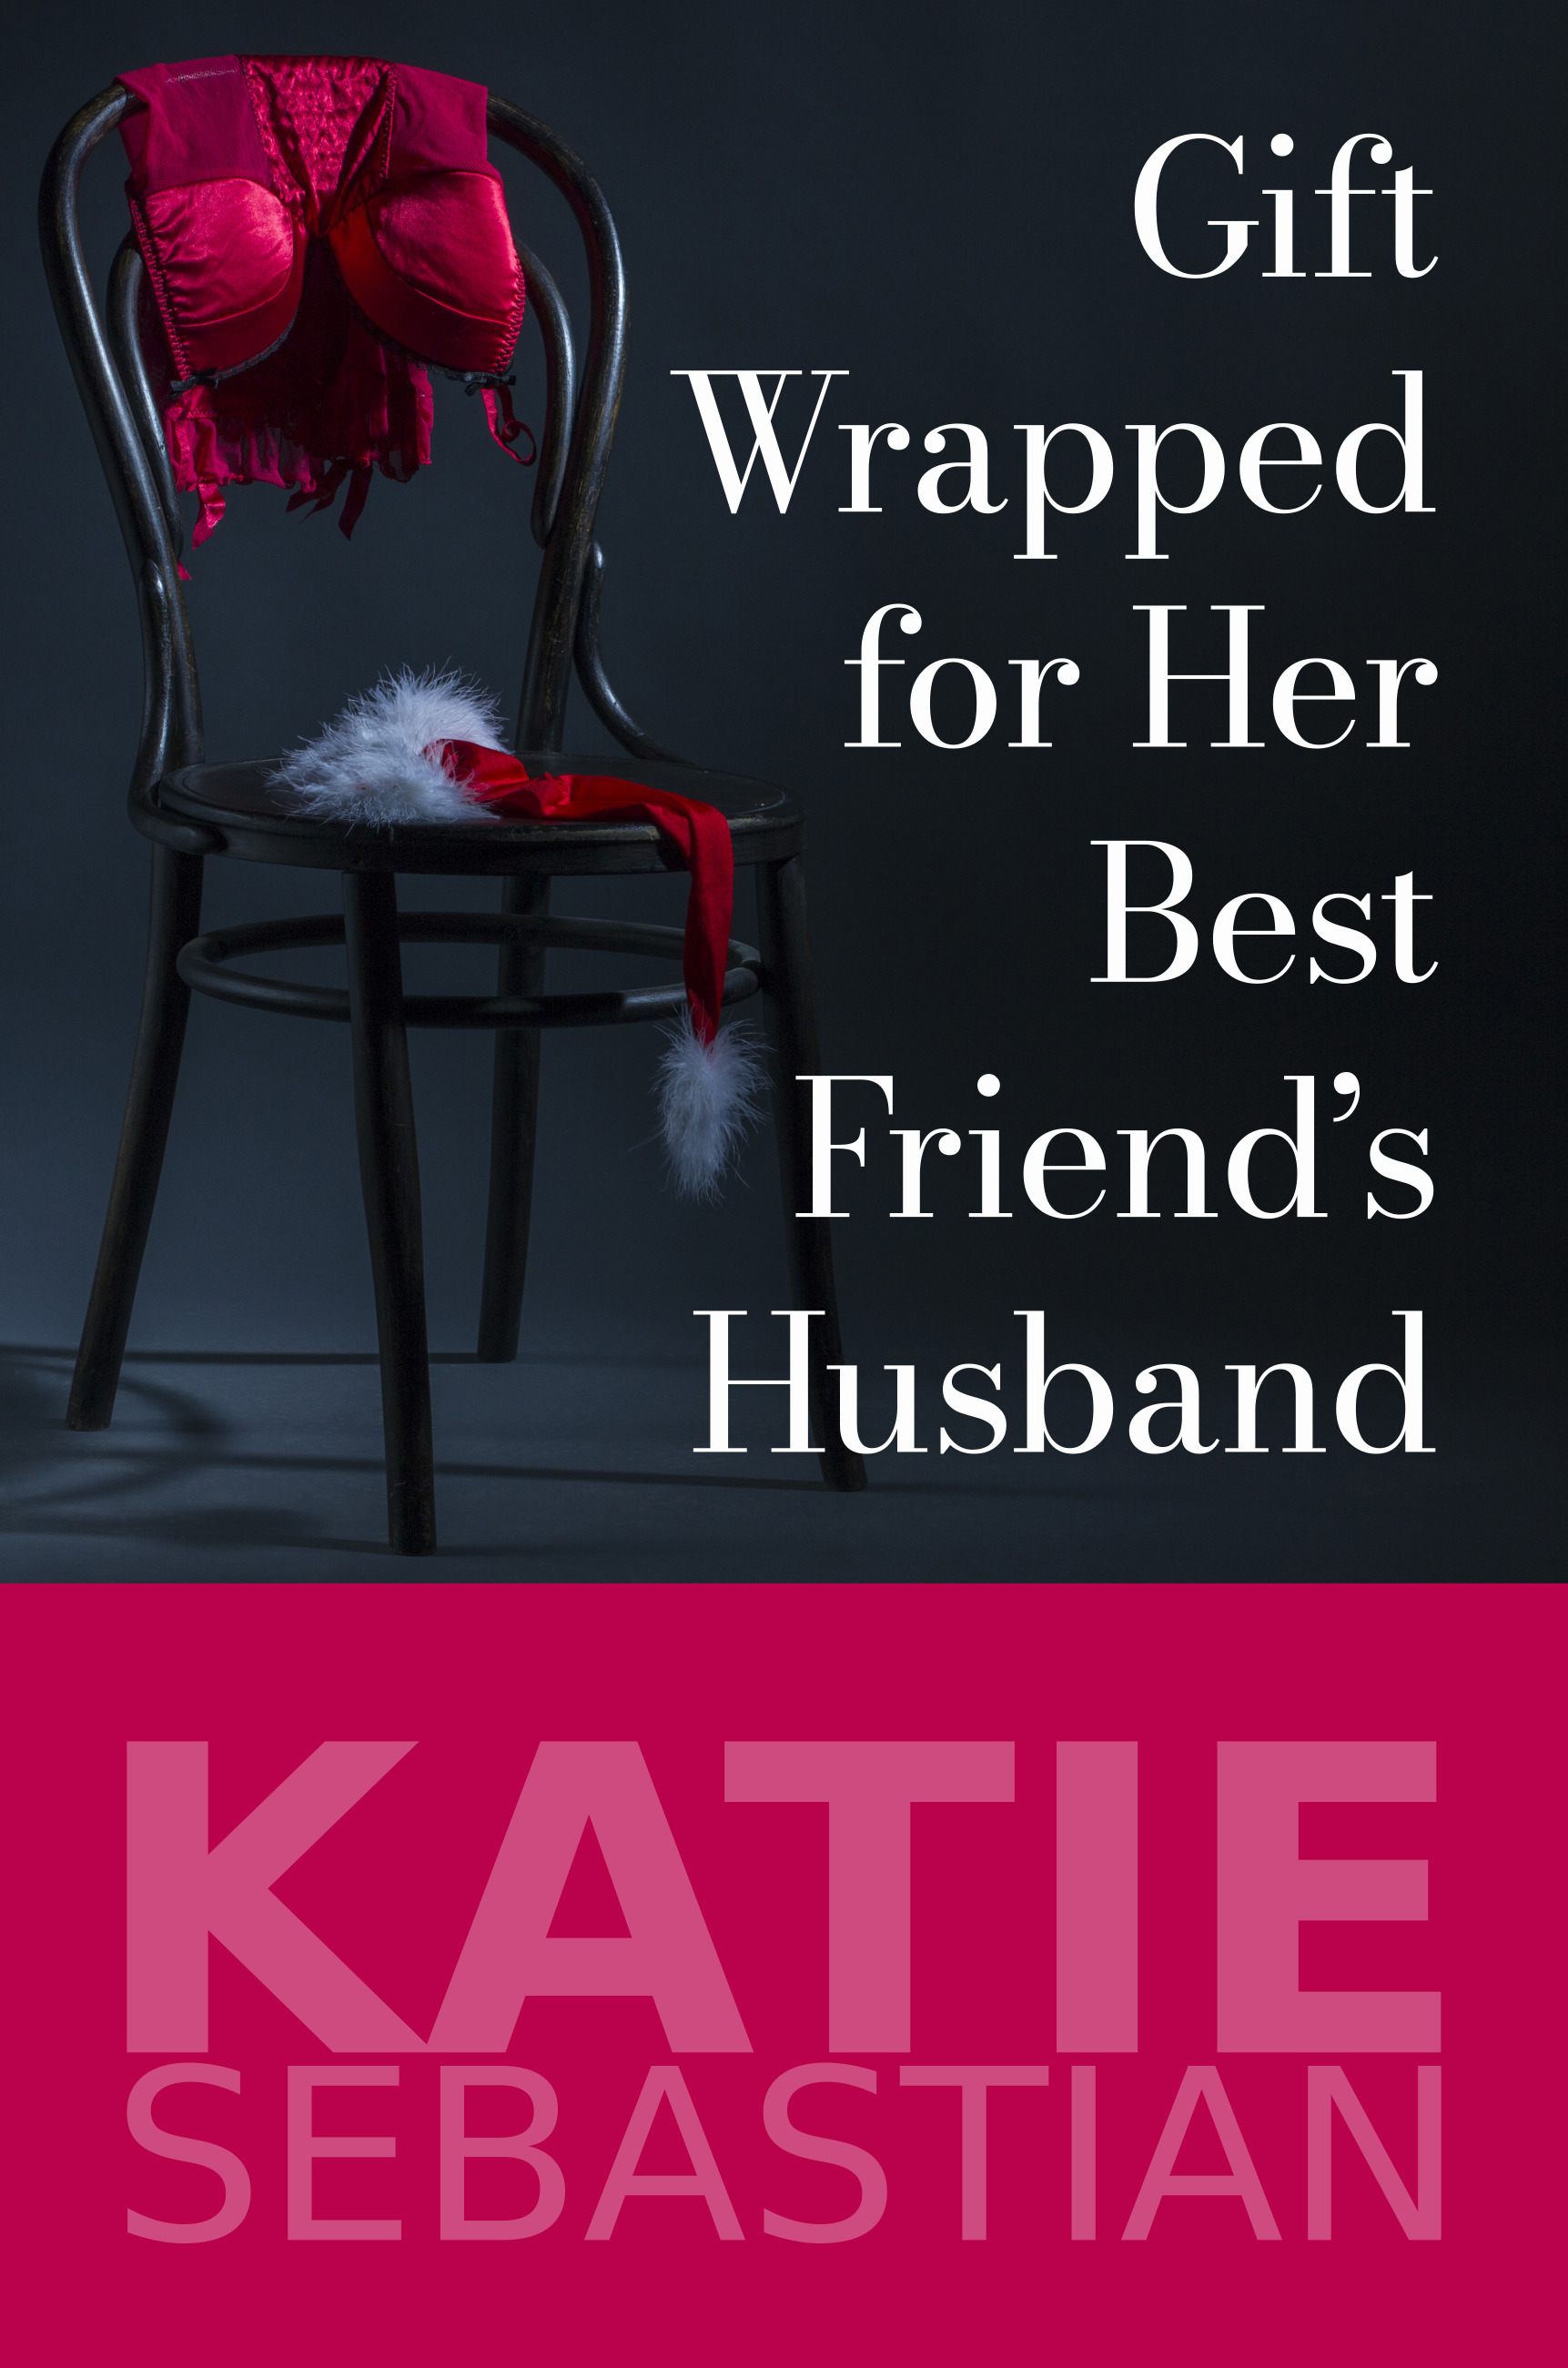 Gift Wrapped for Her Best Friend's Husband